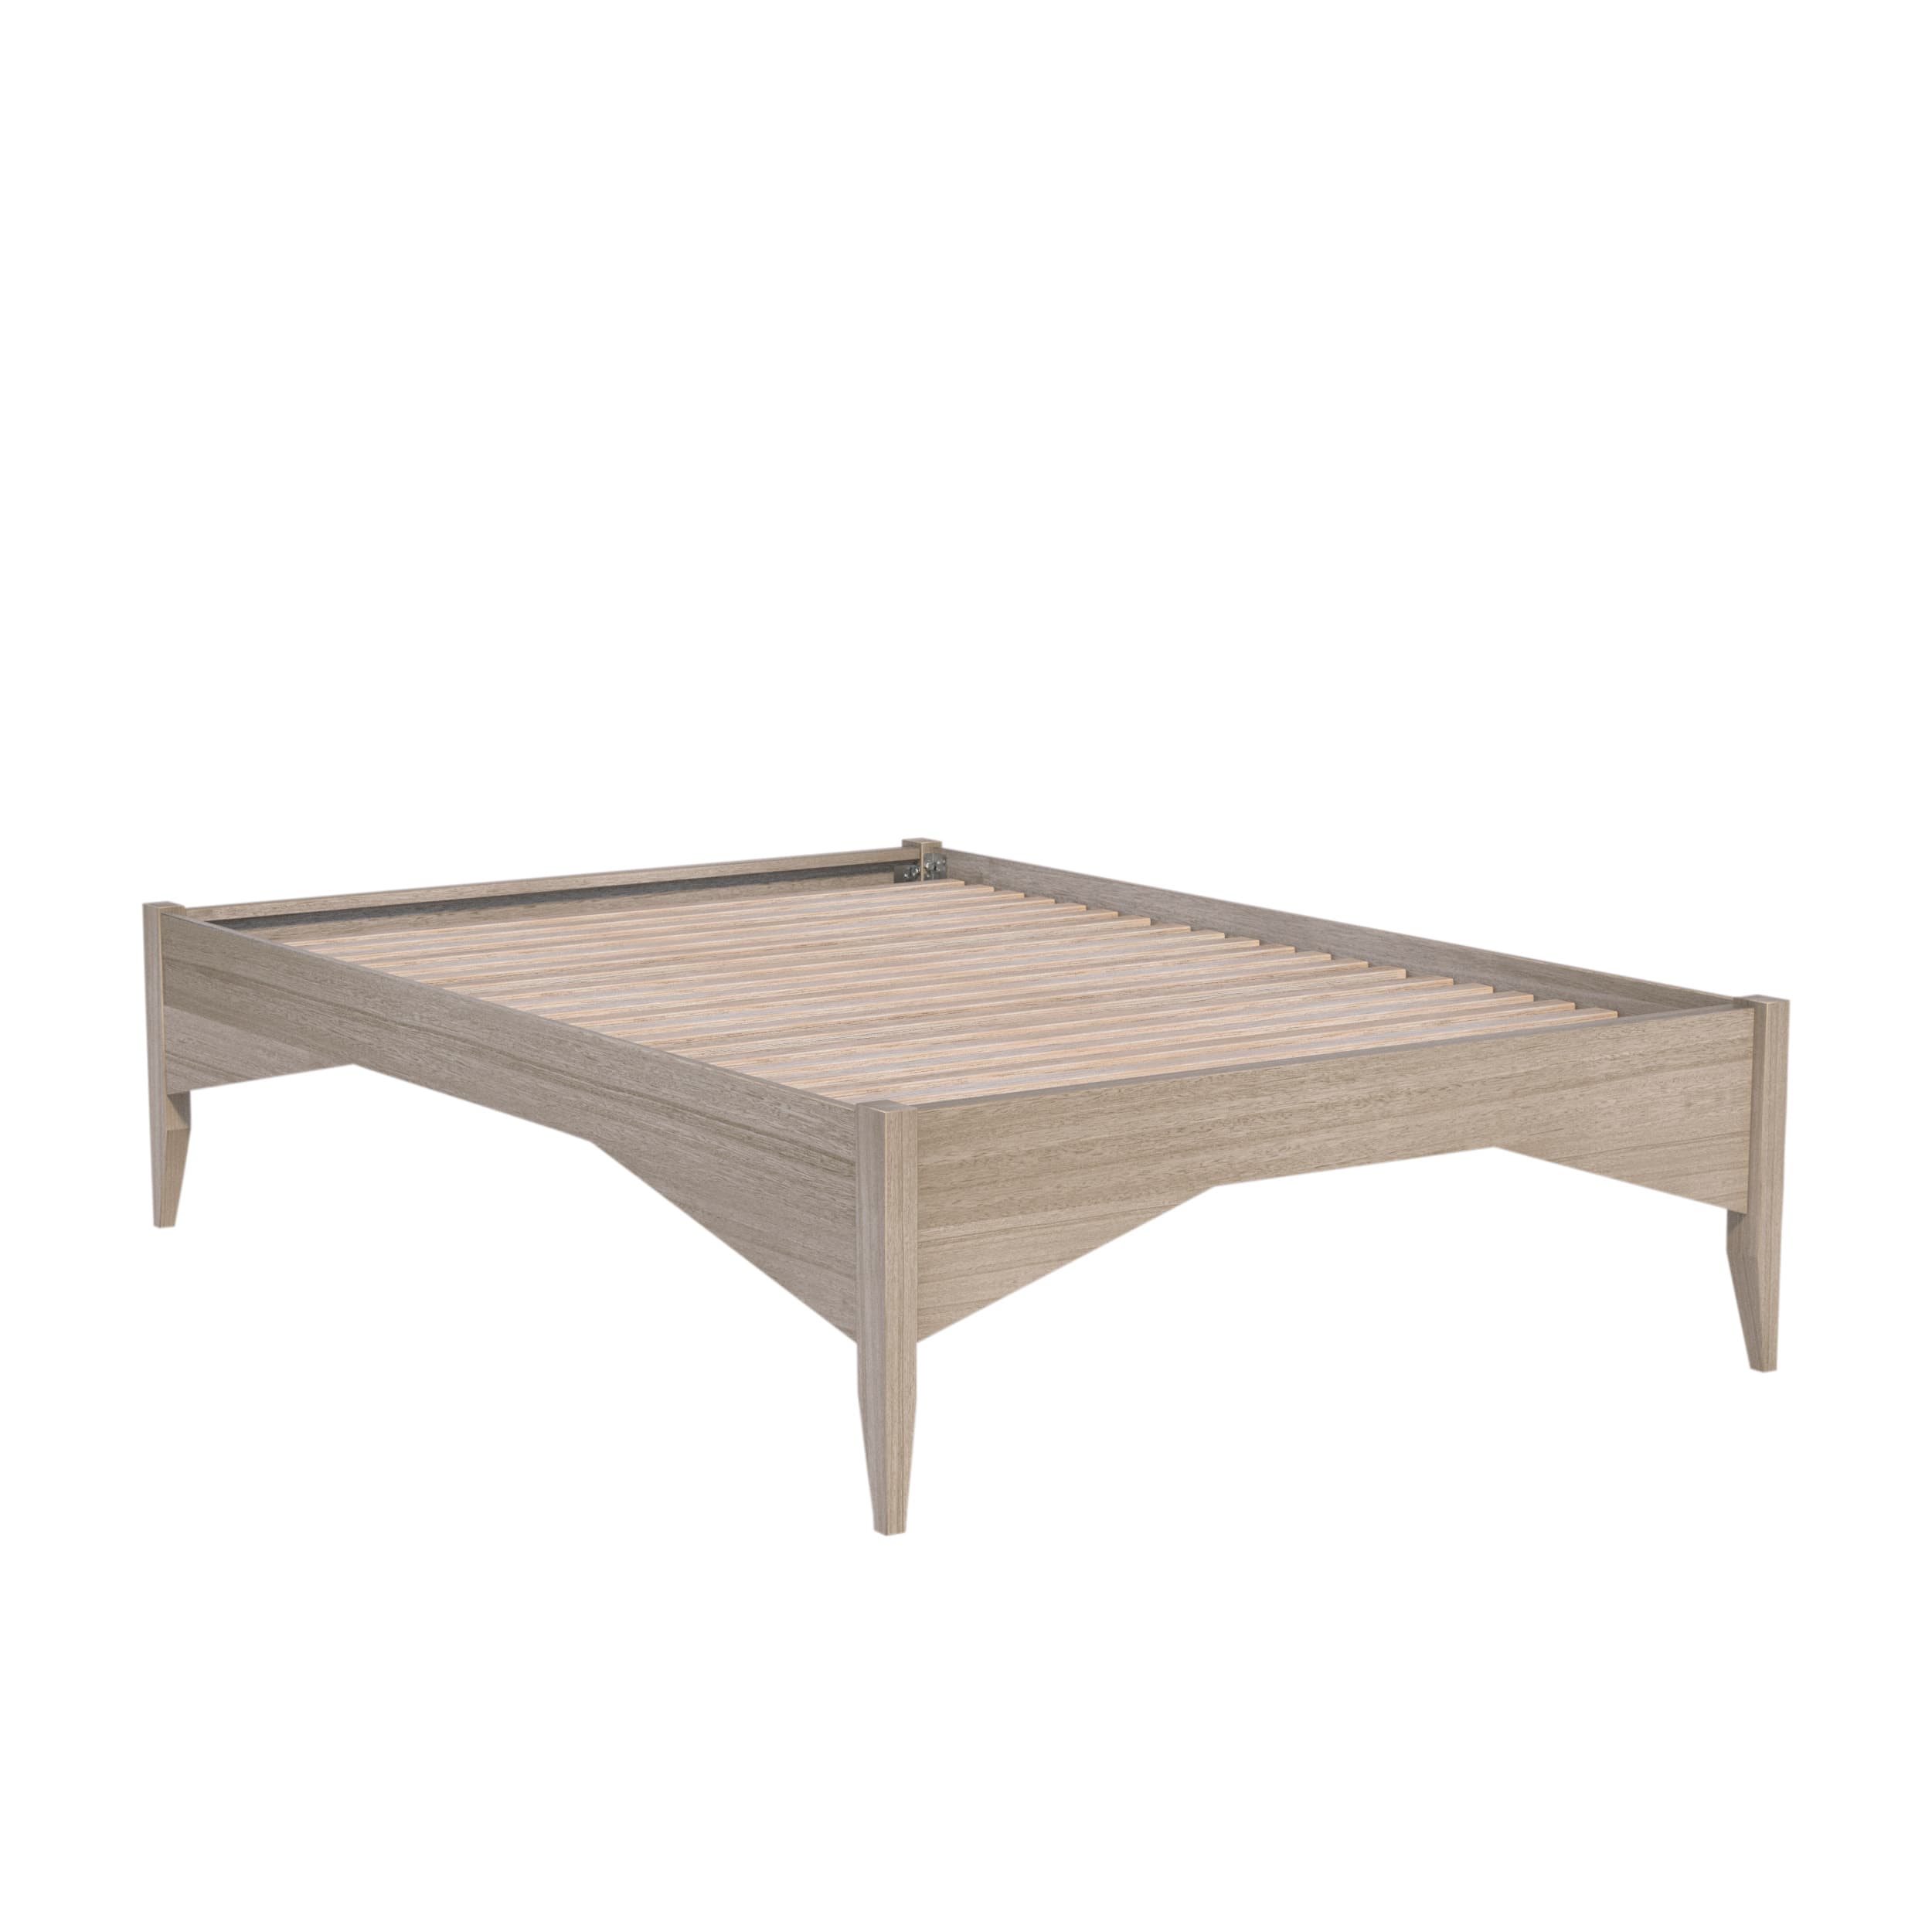 Archie Timber Bed Frame